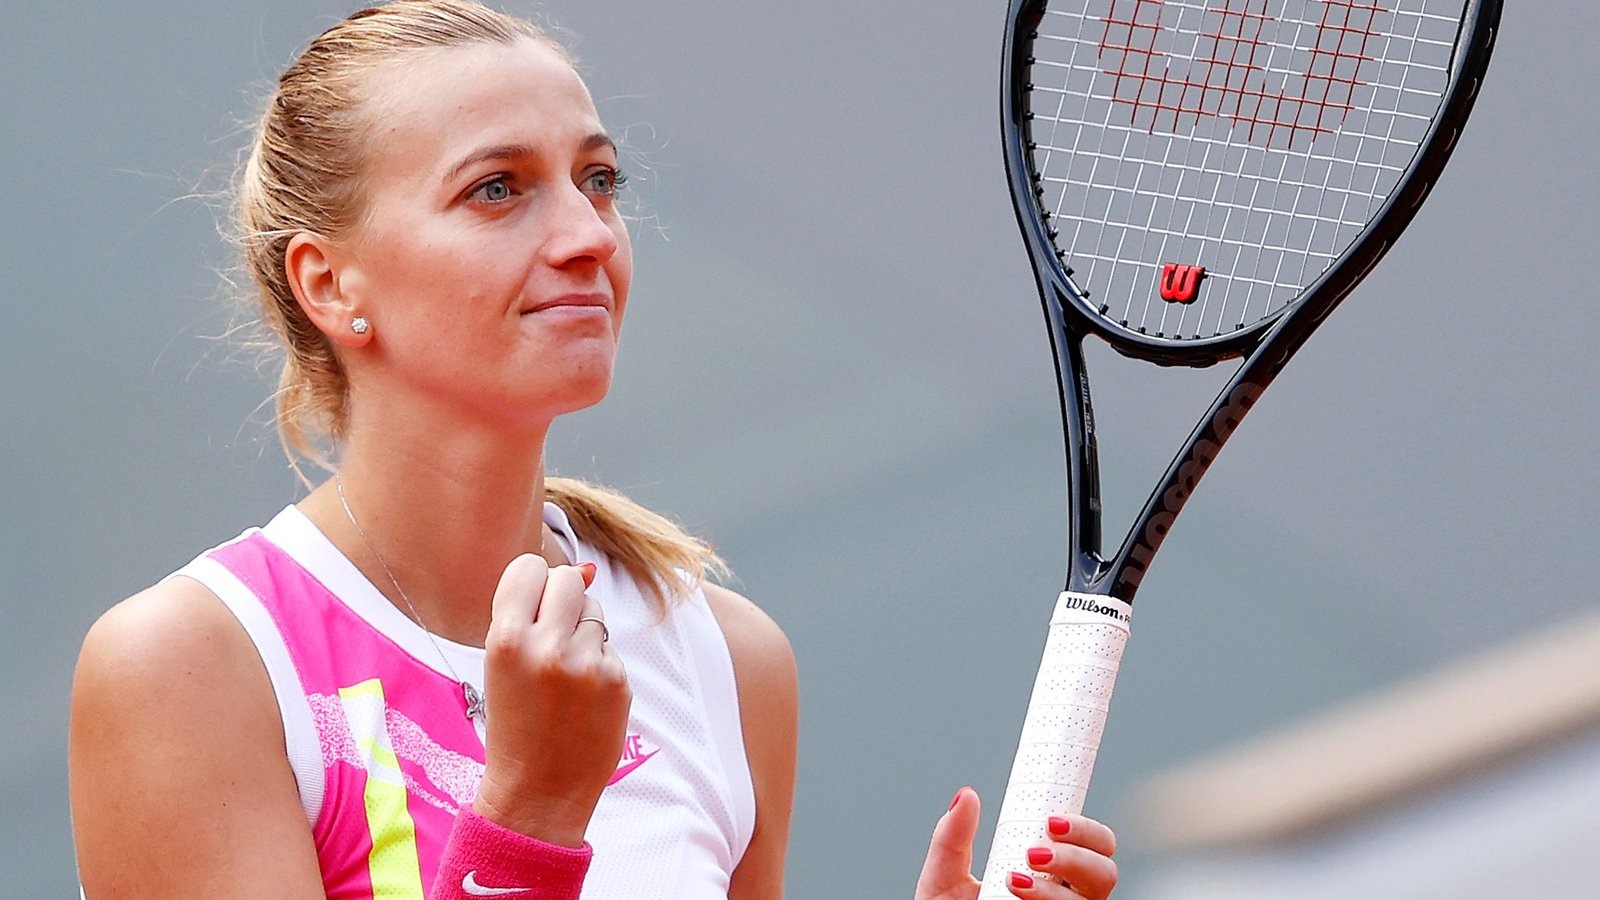 PETRA KVITOVA is one of the athletes attacked by fans at games